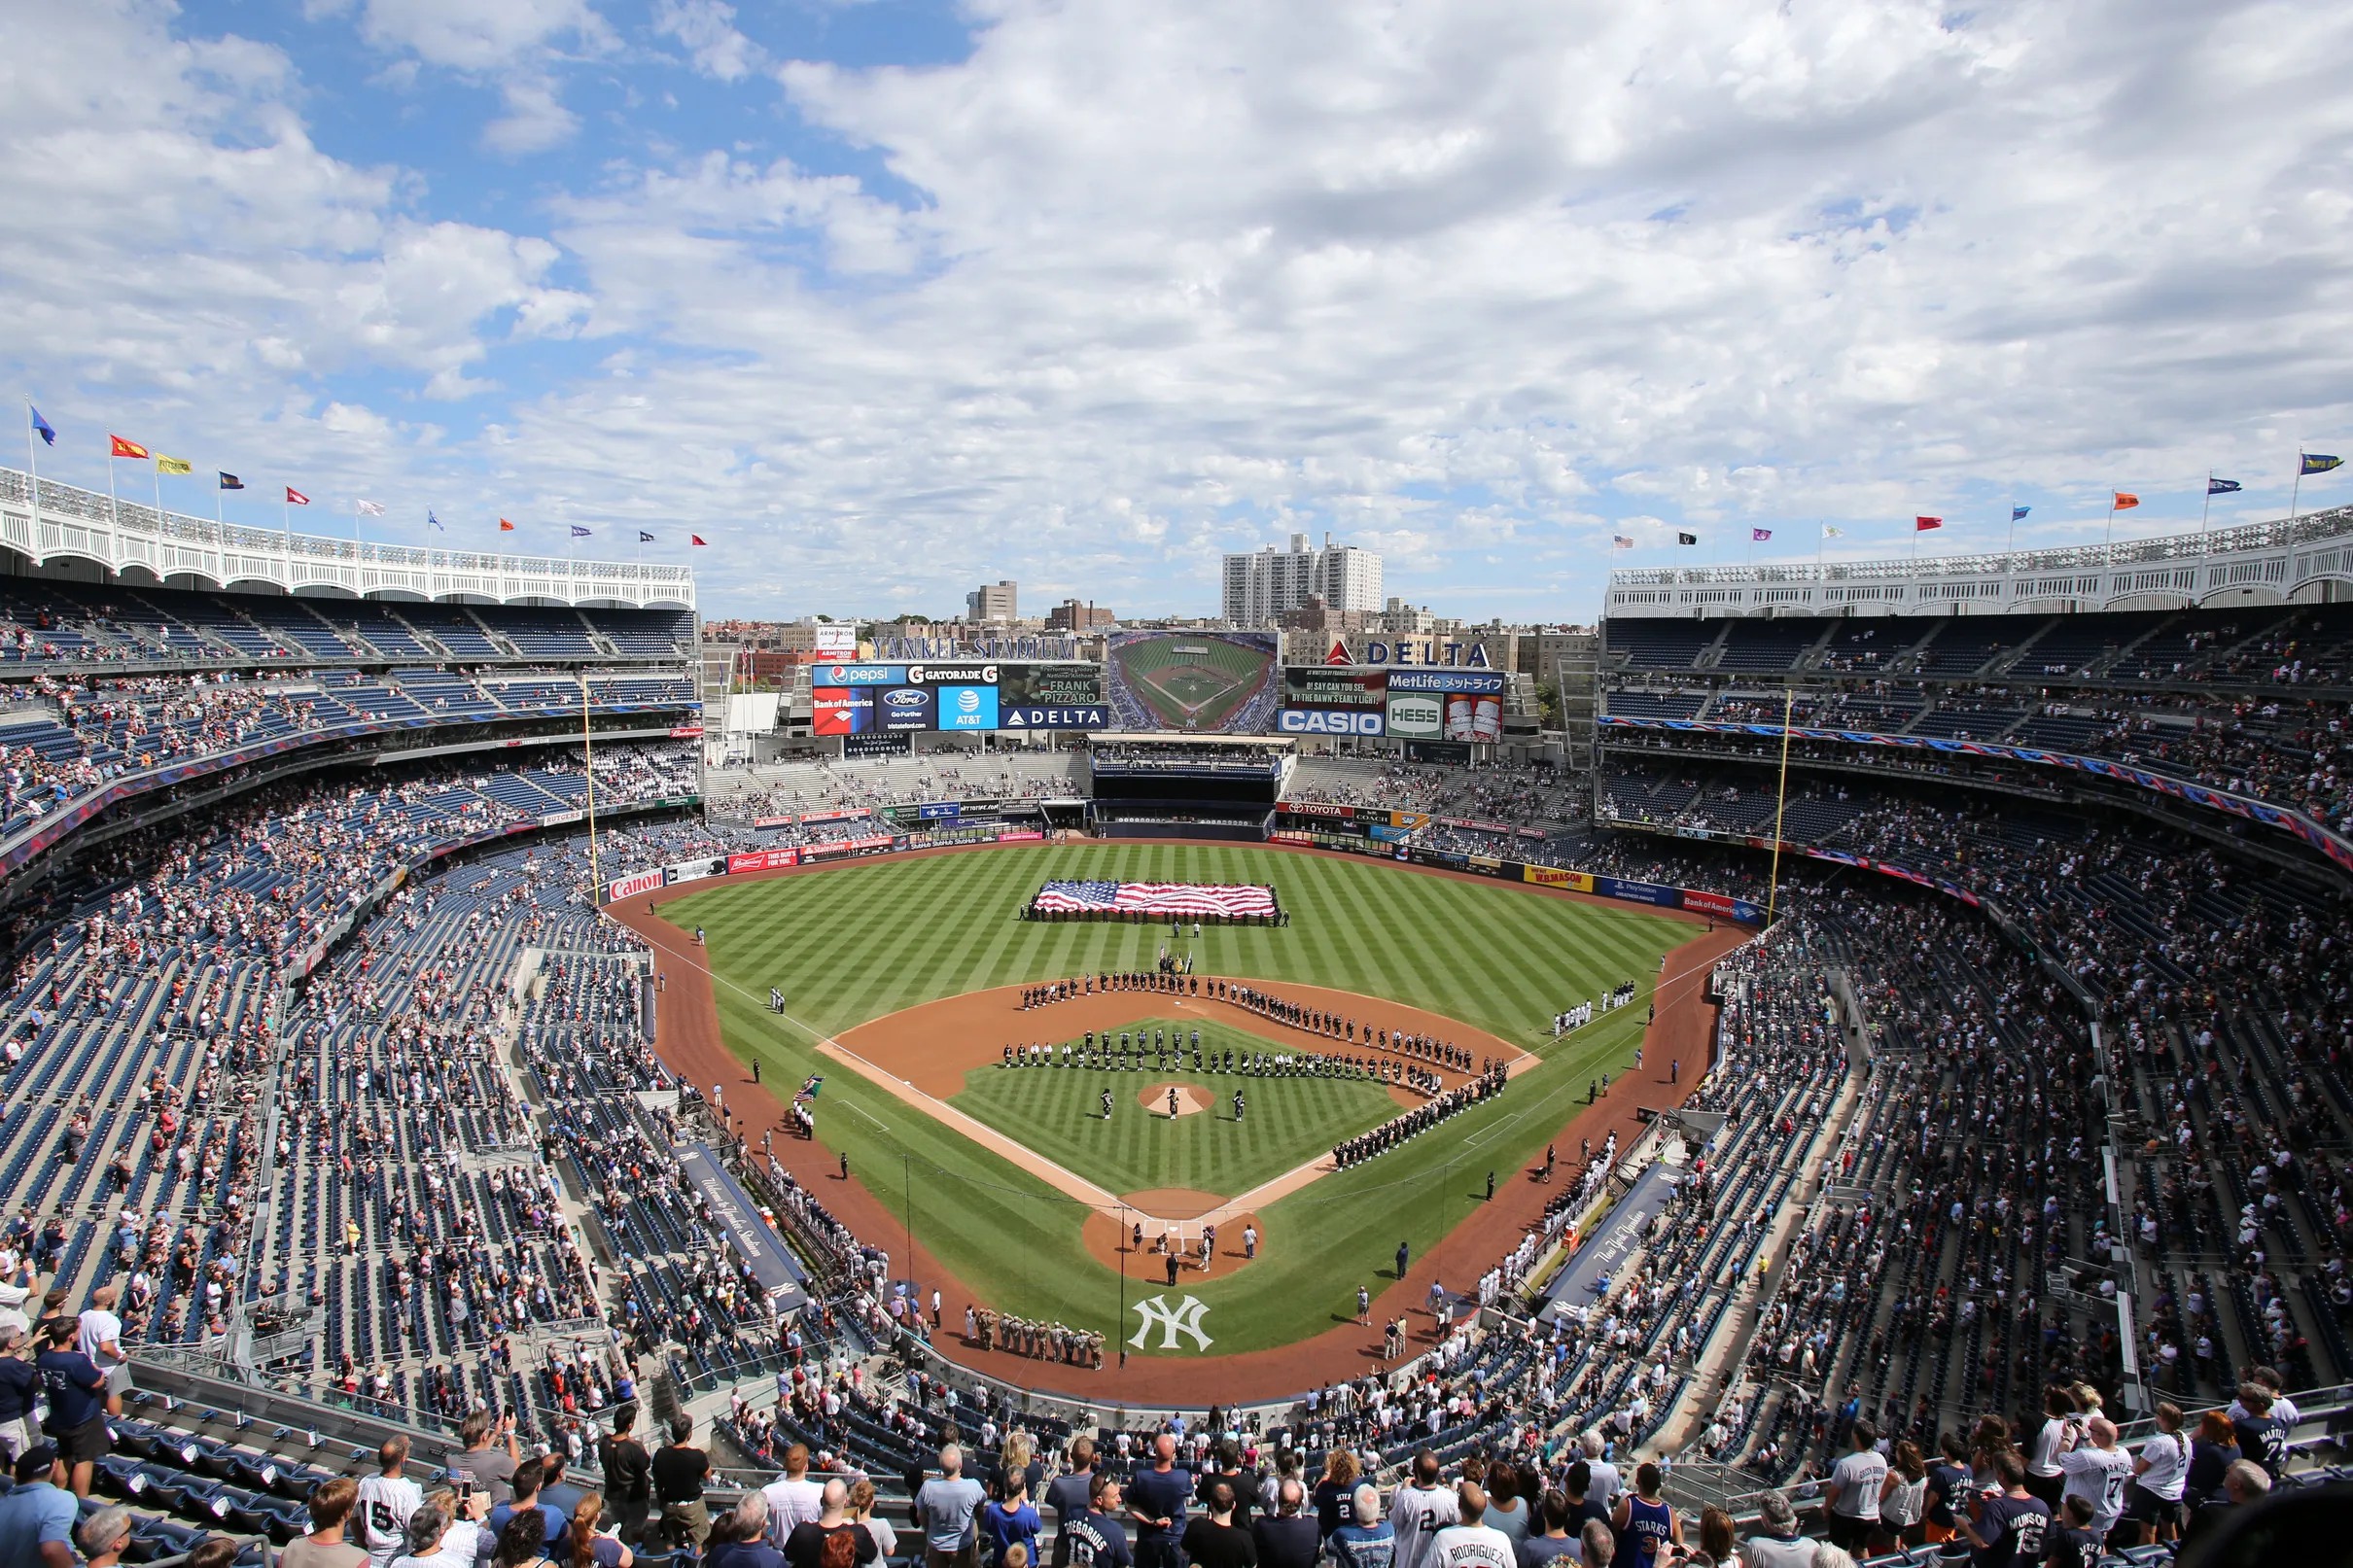 The New York Yankees and the Fourth of July